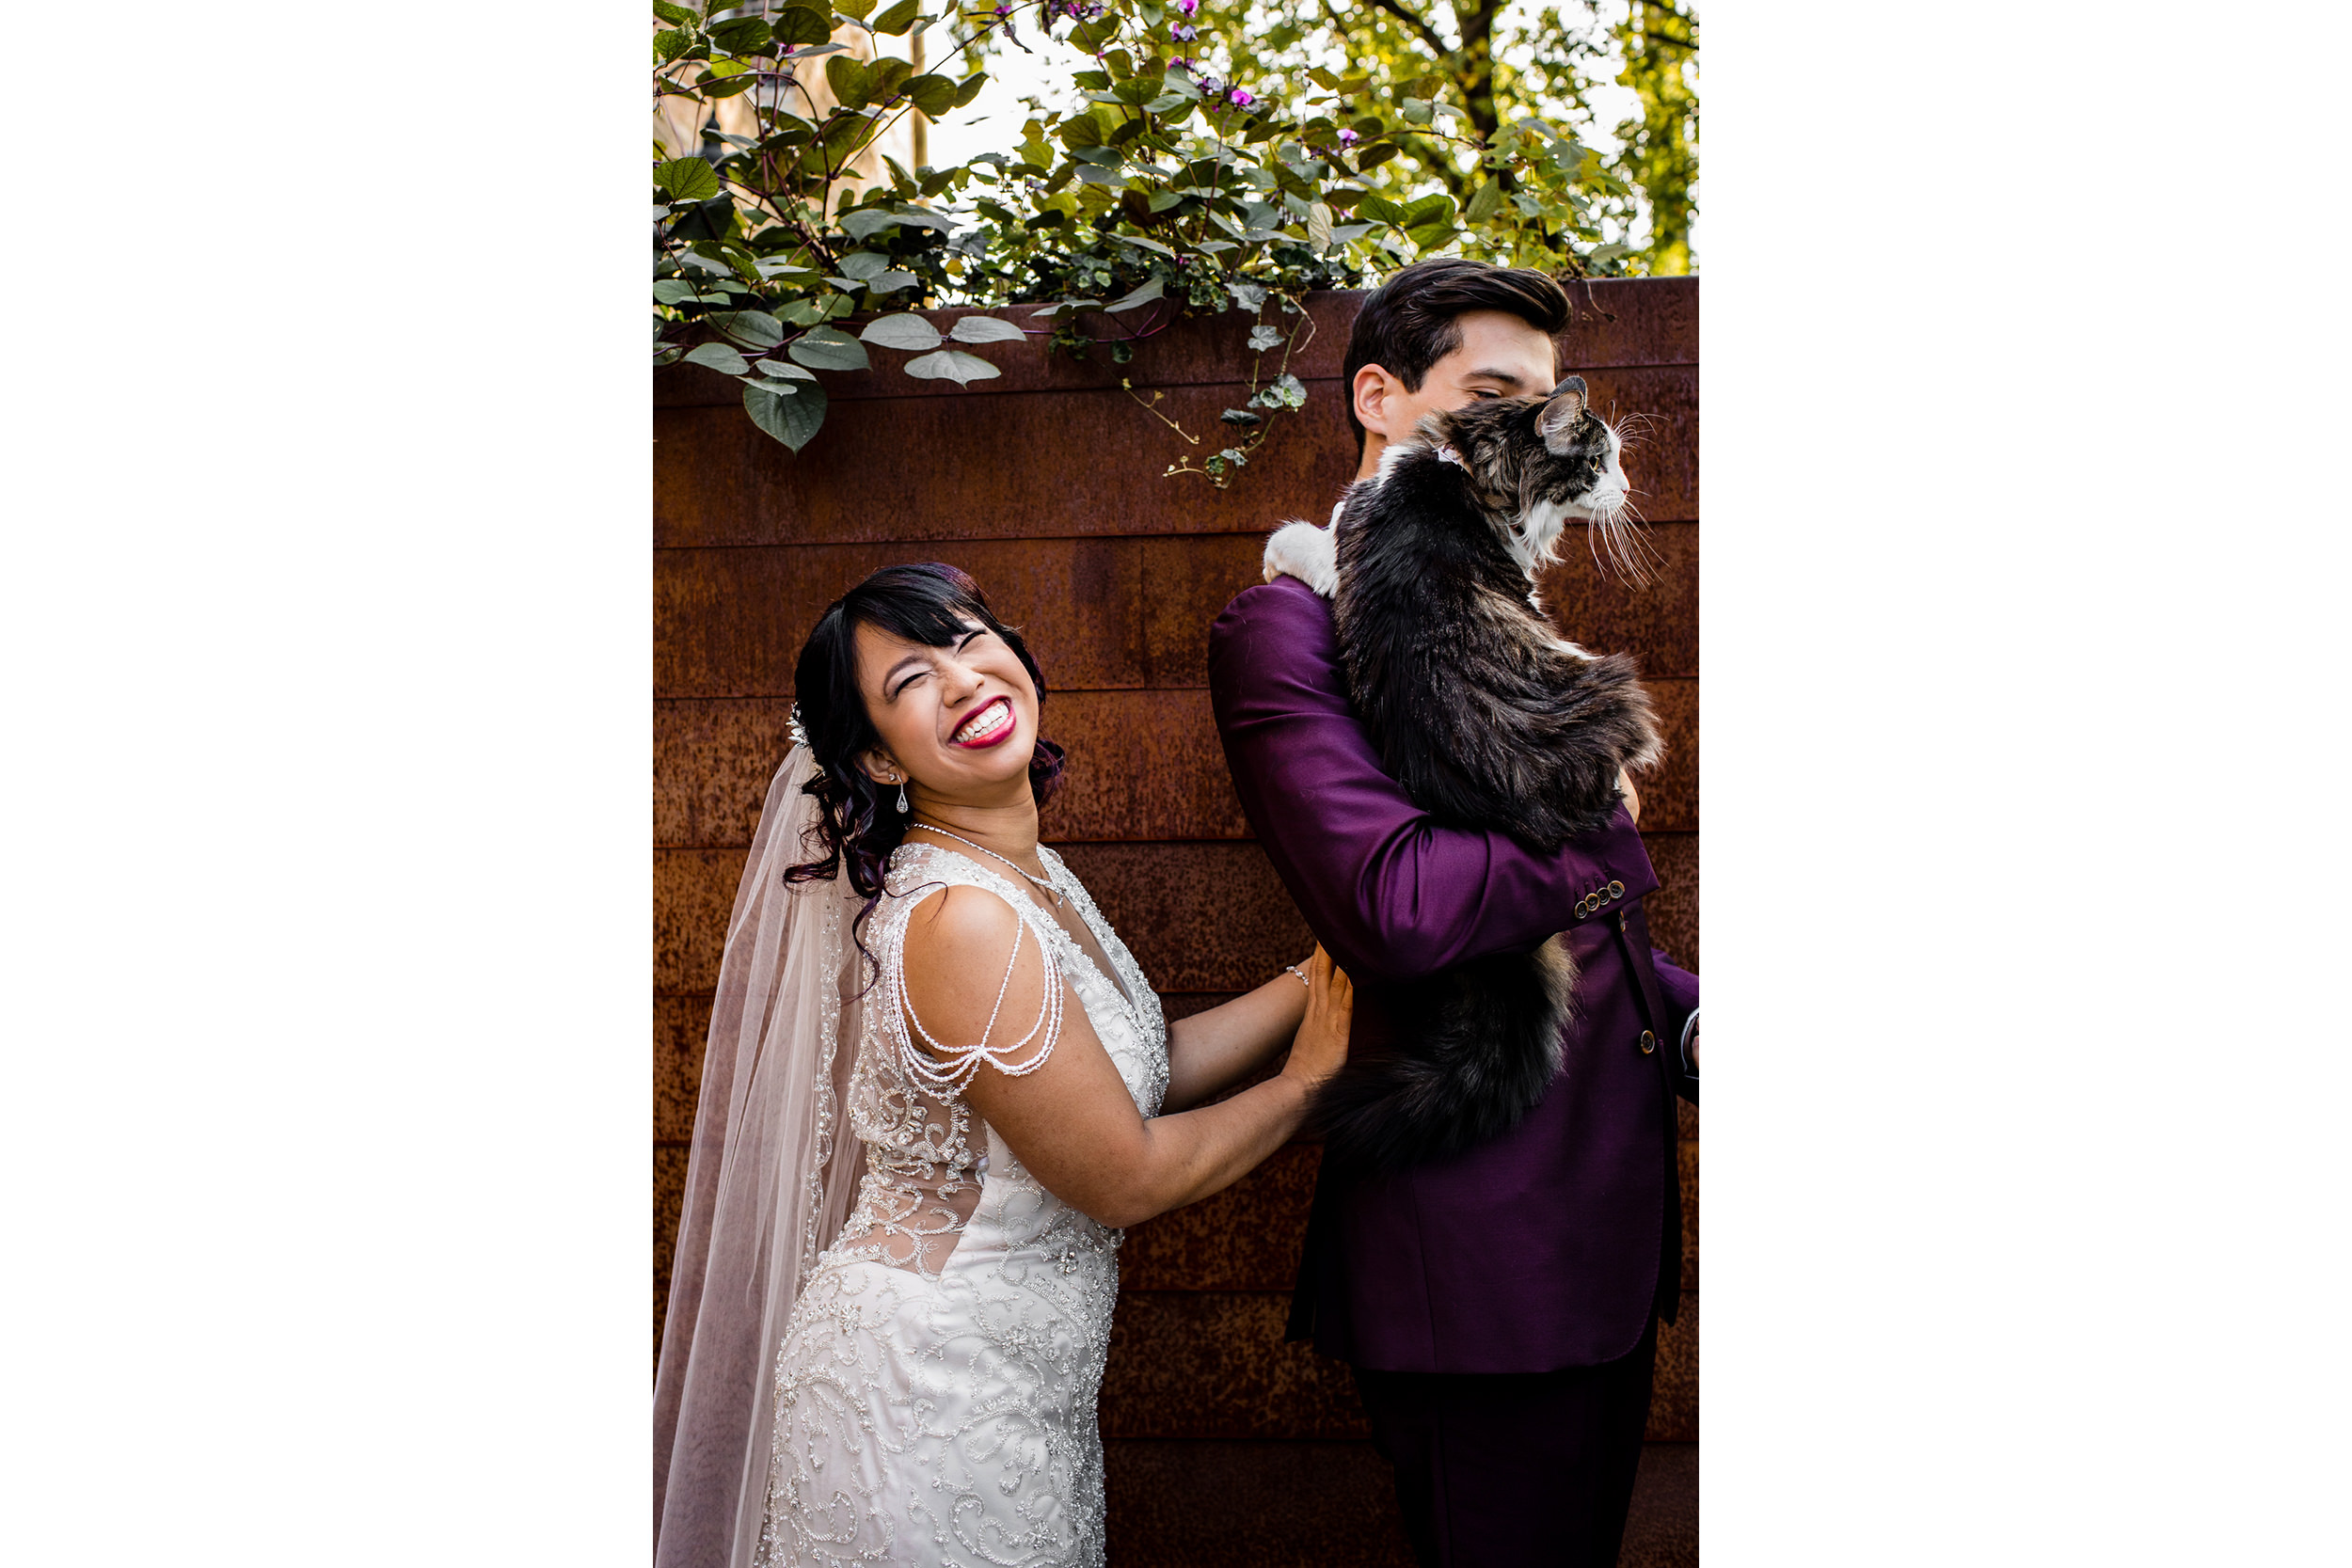 A bride laughs while her groom holds their cat after a wedding at the Joinery.